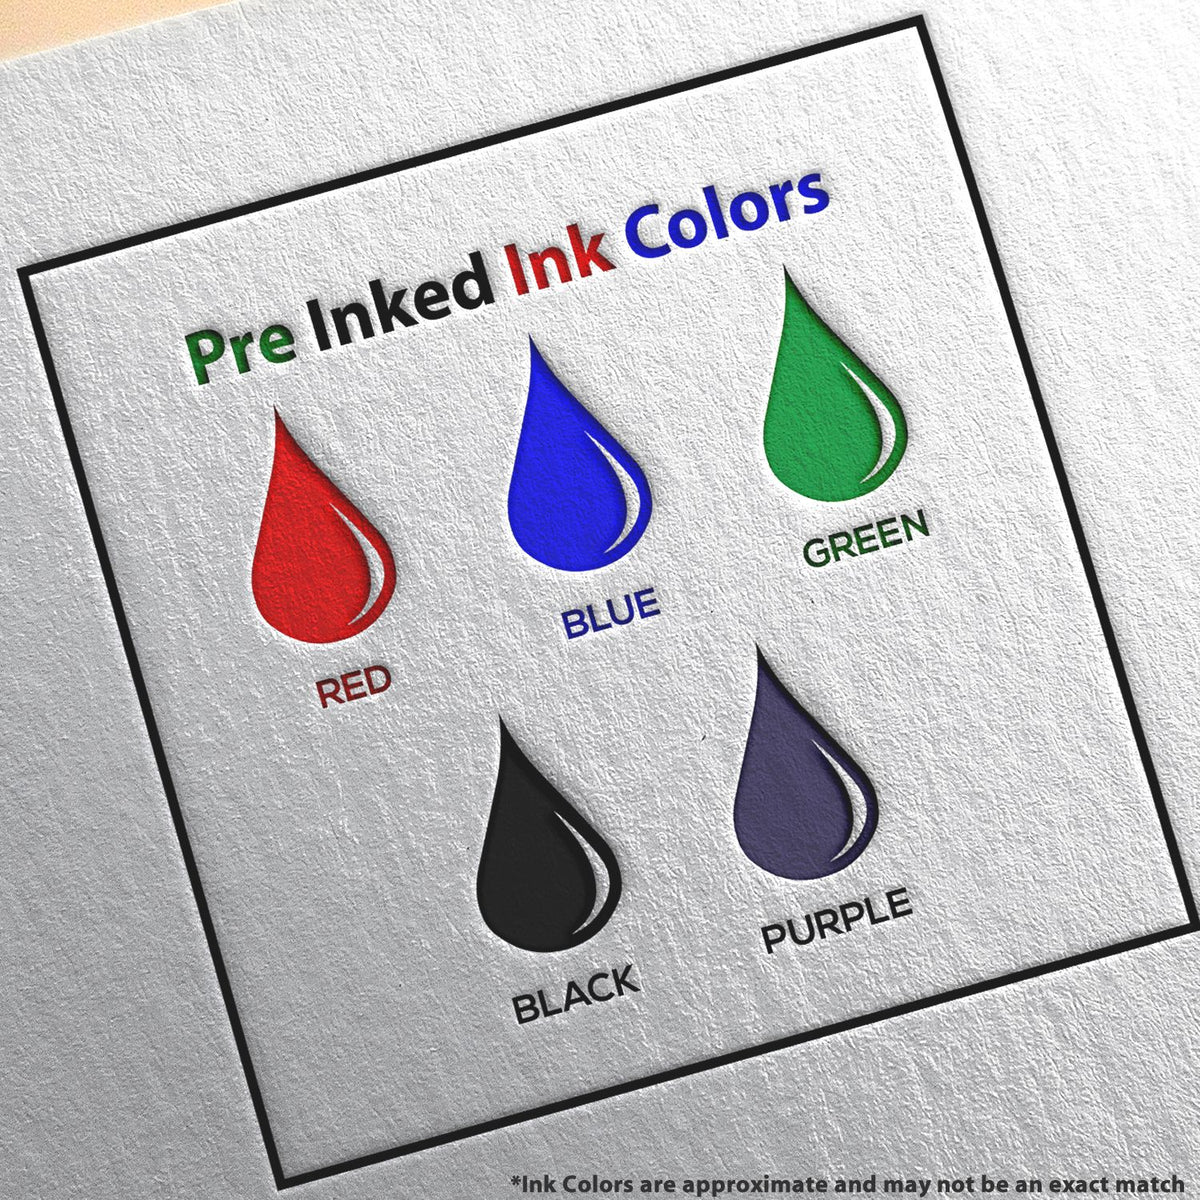 A picture showing the different ink colors or hues available for the Premium MaxLight Pre-Inked South Dakota Geology Stamp